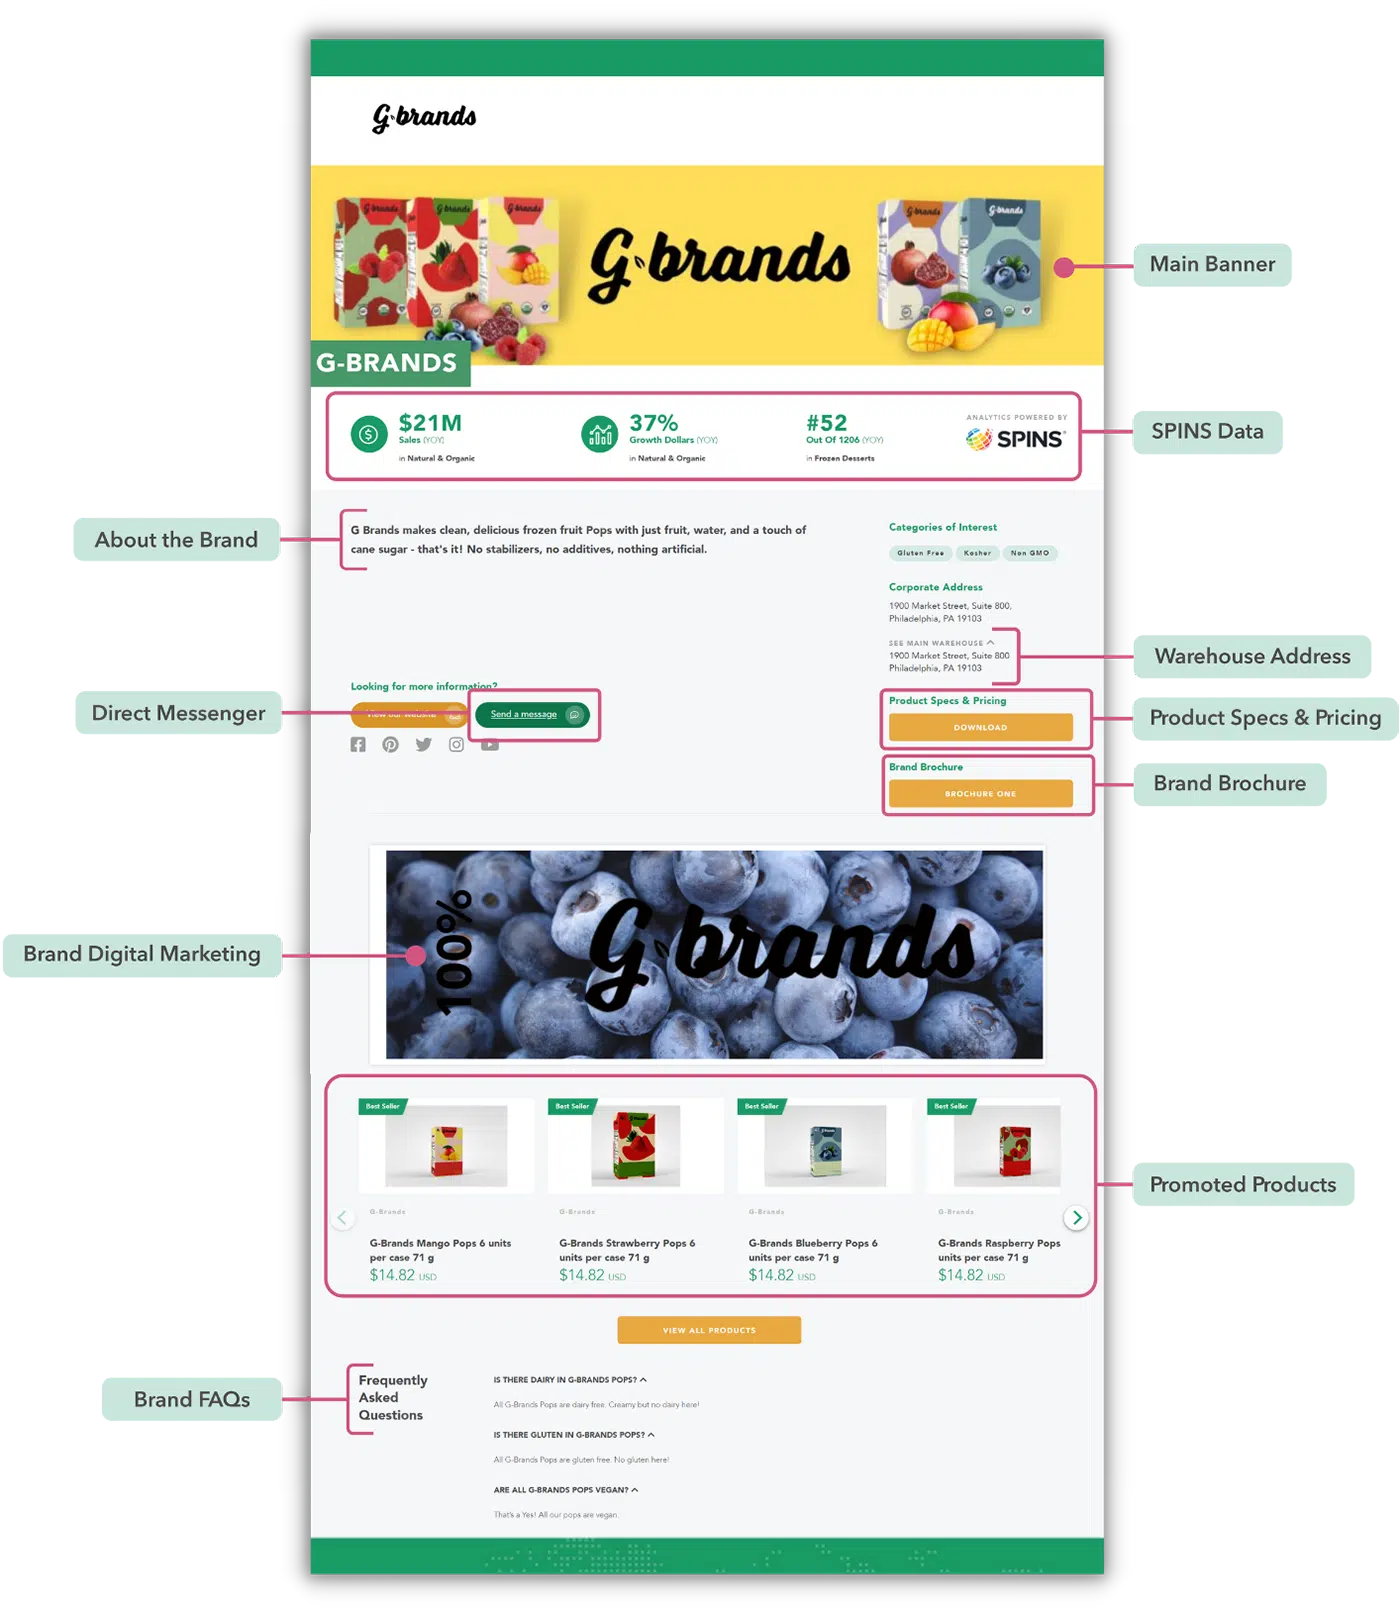 Brand Page Map